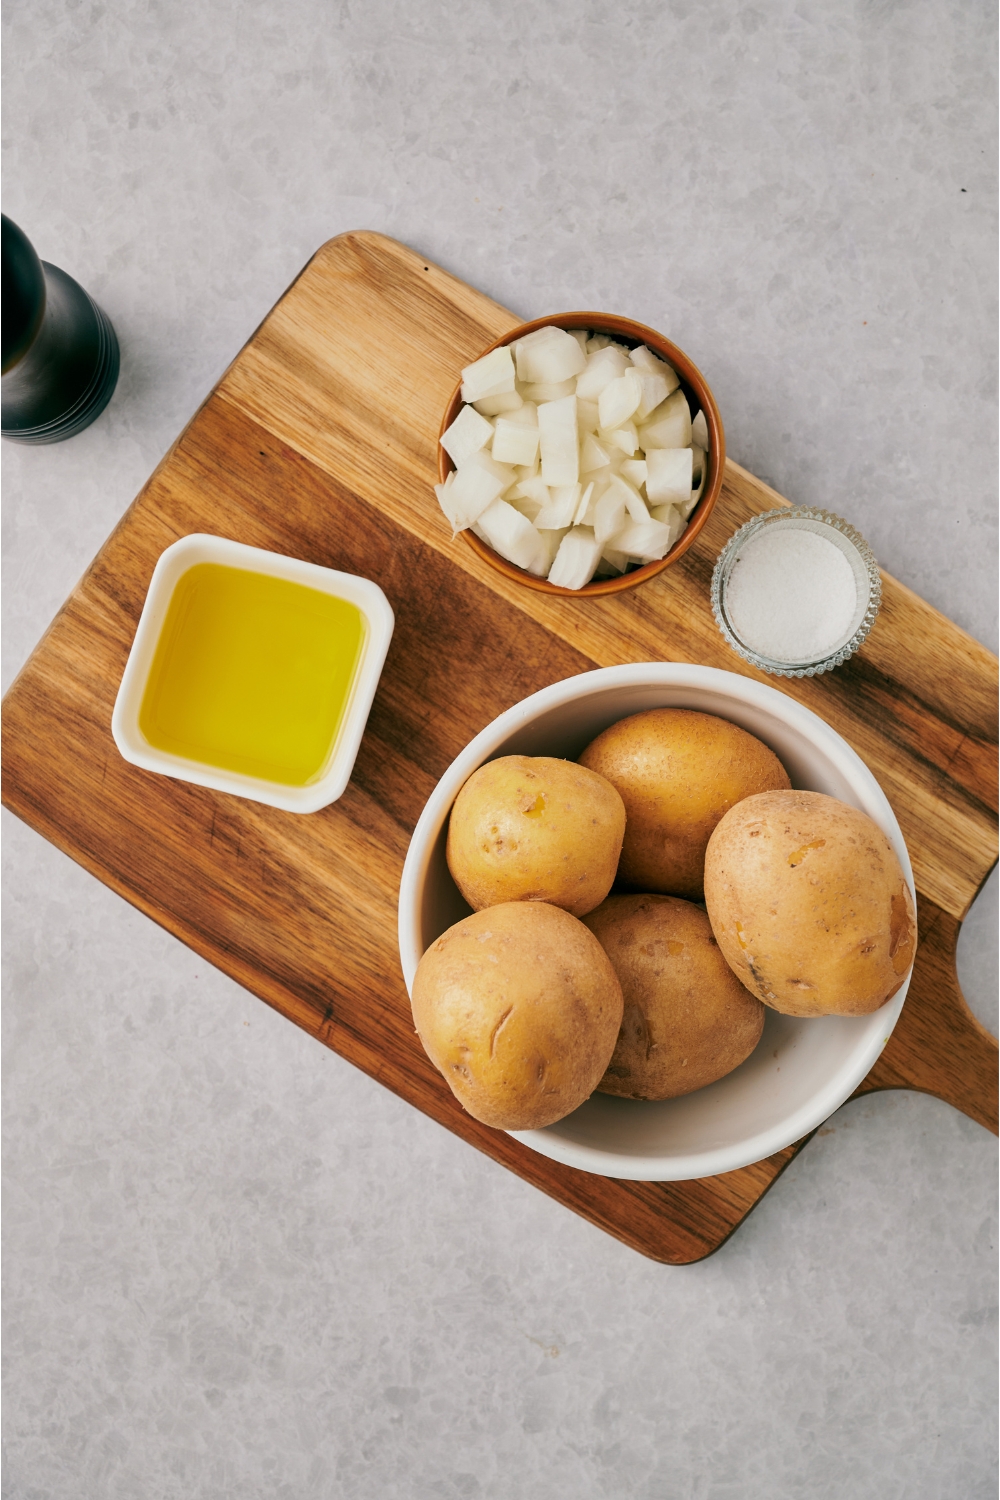 Bowls of potatoes, diced onion, salt, and oil on a wooden cutting board.